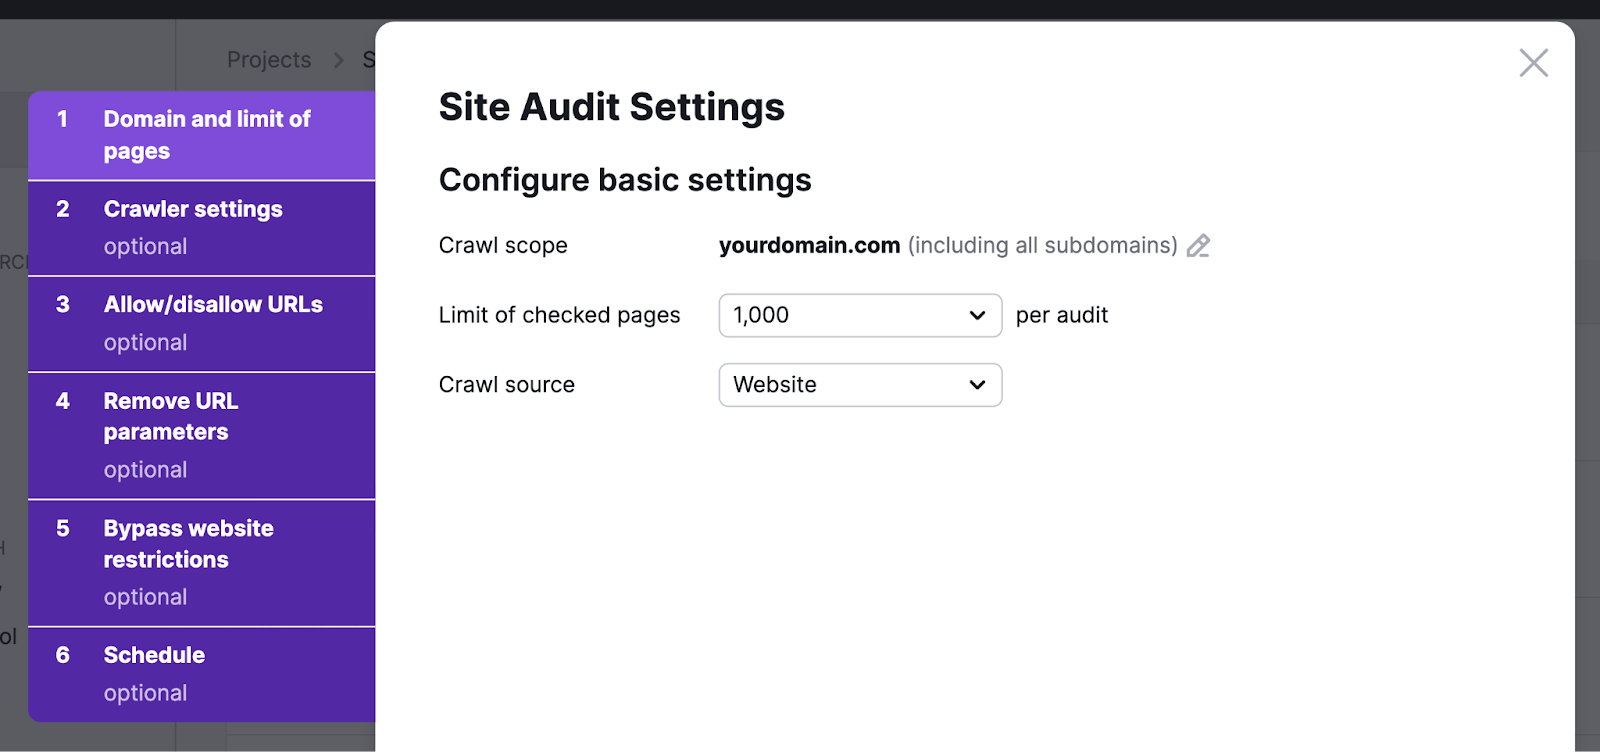 Limit of checked pages set to 1000 per audit in Site Audit settings